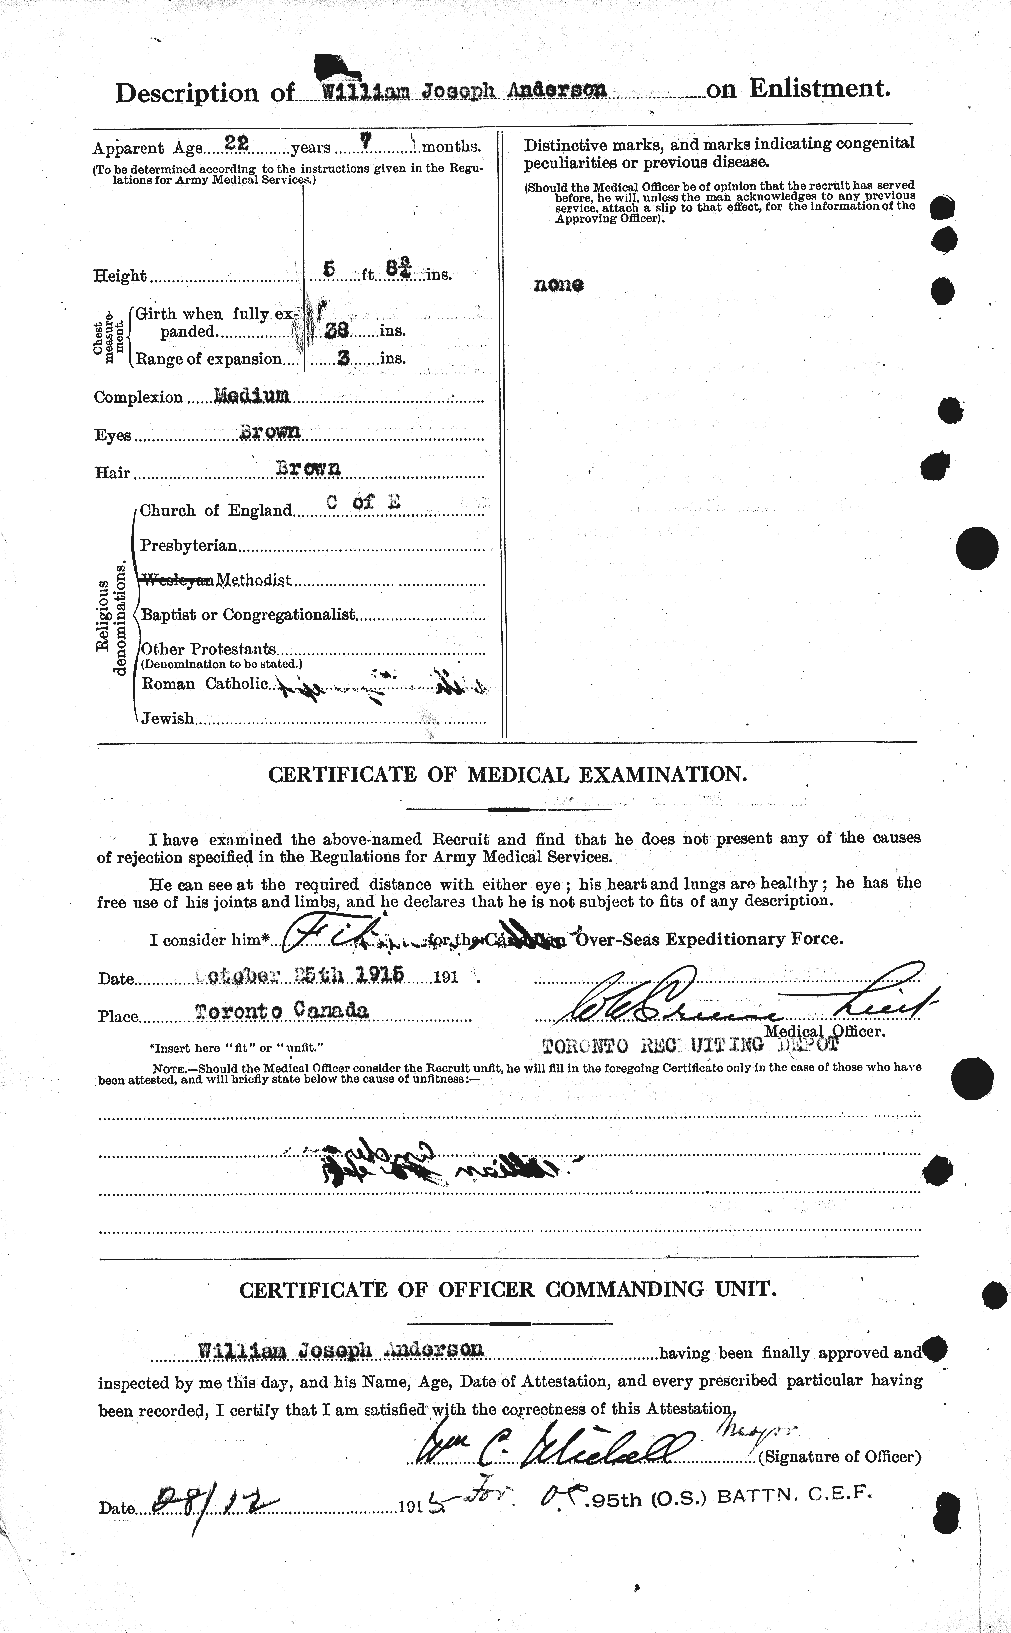 Personnel Records of the First World War - CEF 210823b